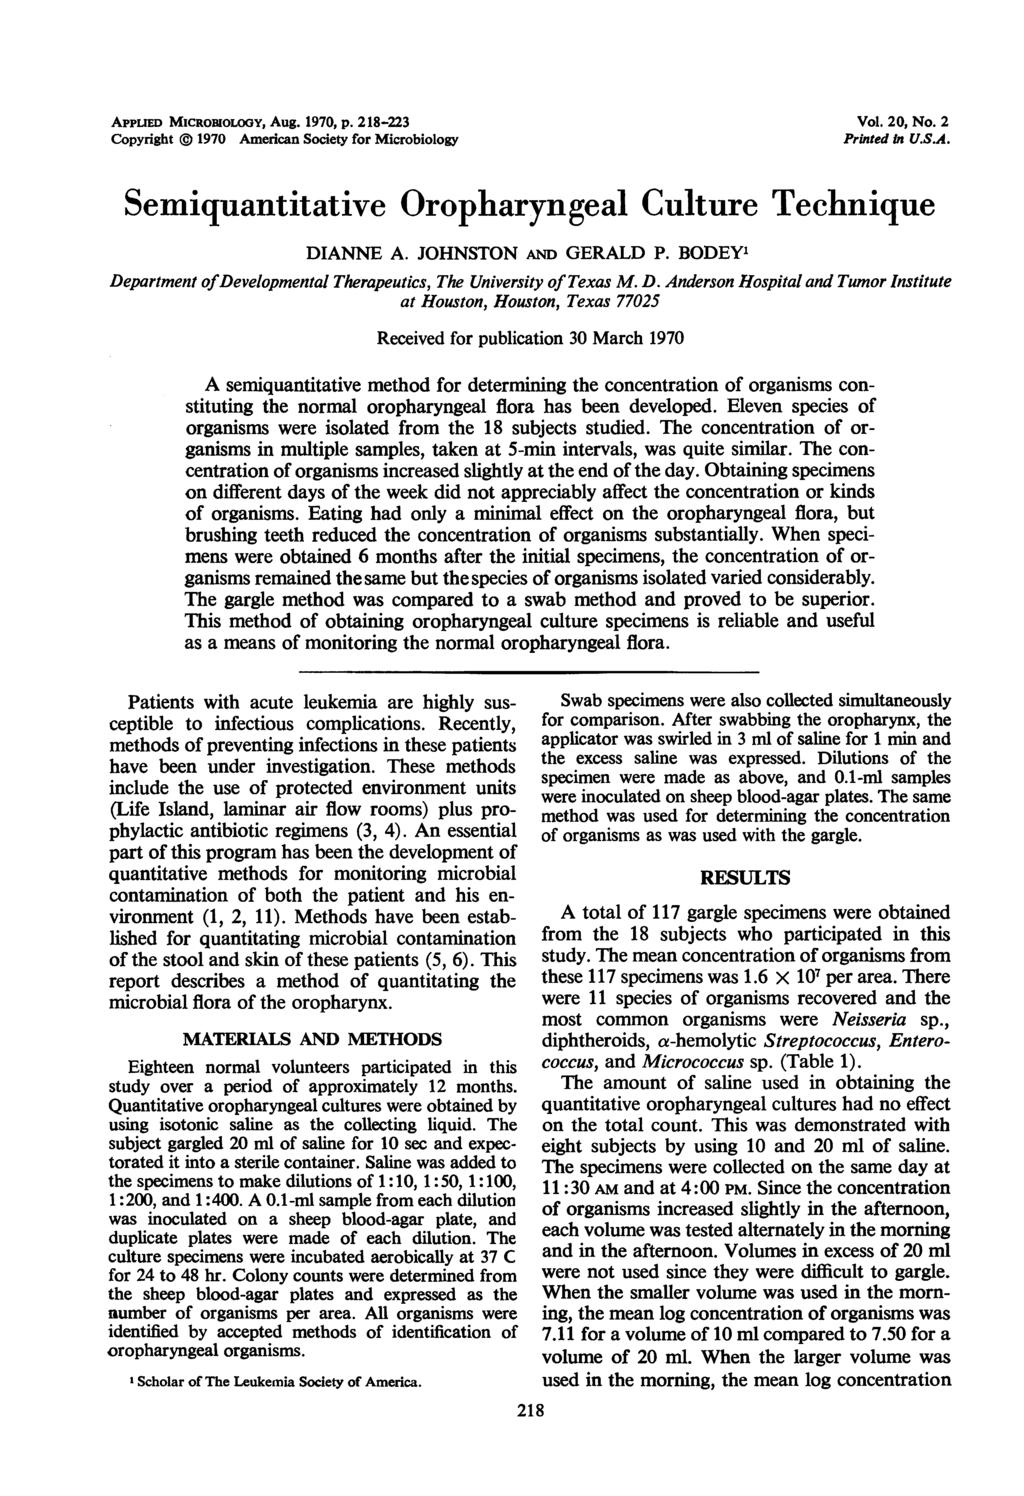 APPLIED MICRomoLOGY, Aug. 1970, p. 218-223 Copyright ) 1970 American Society for Microbiology Vol. 20, No. 2 Printed In U.S.A. Semiquantitative Oropharyngeal Culture Technique DIANNE A.